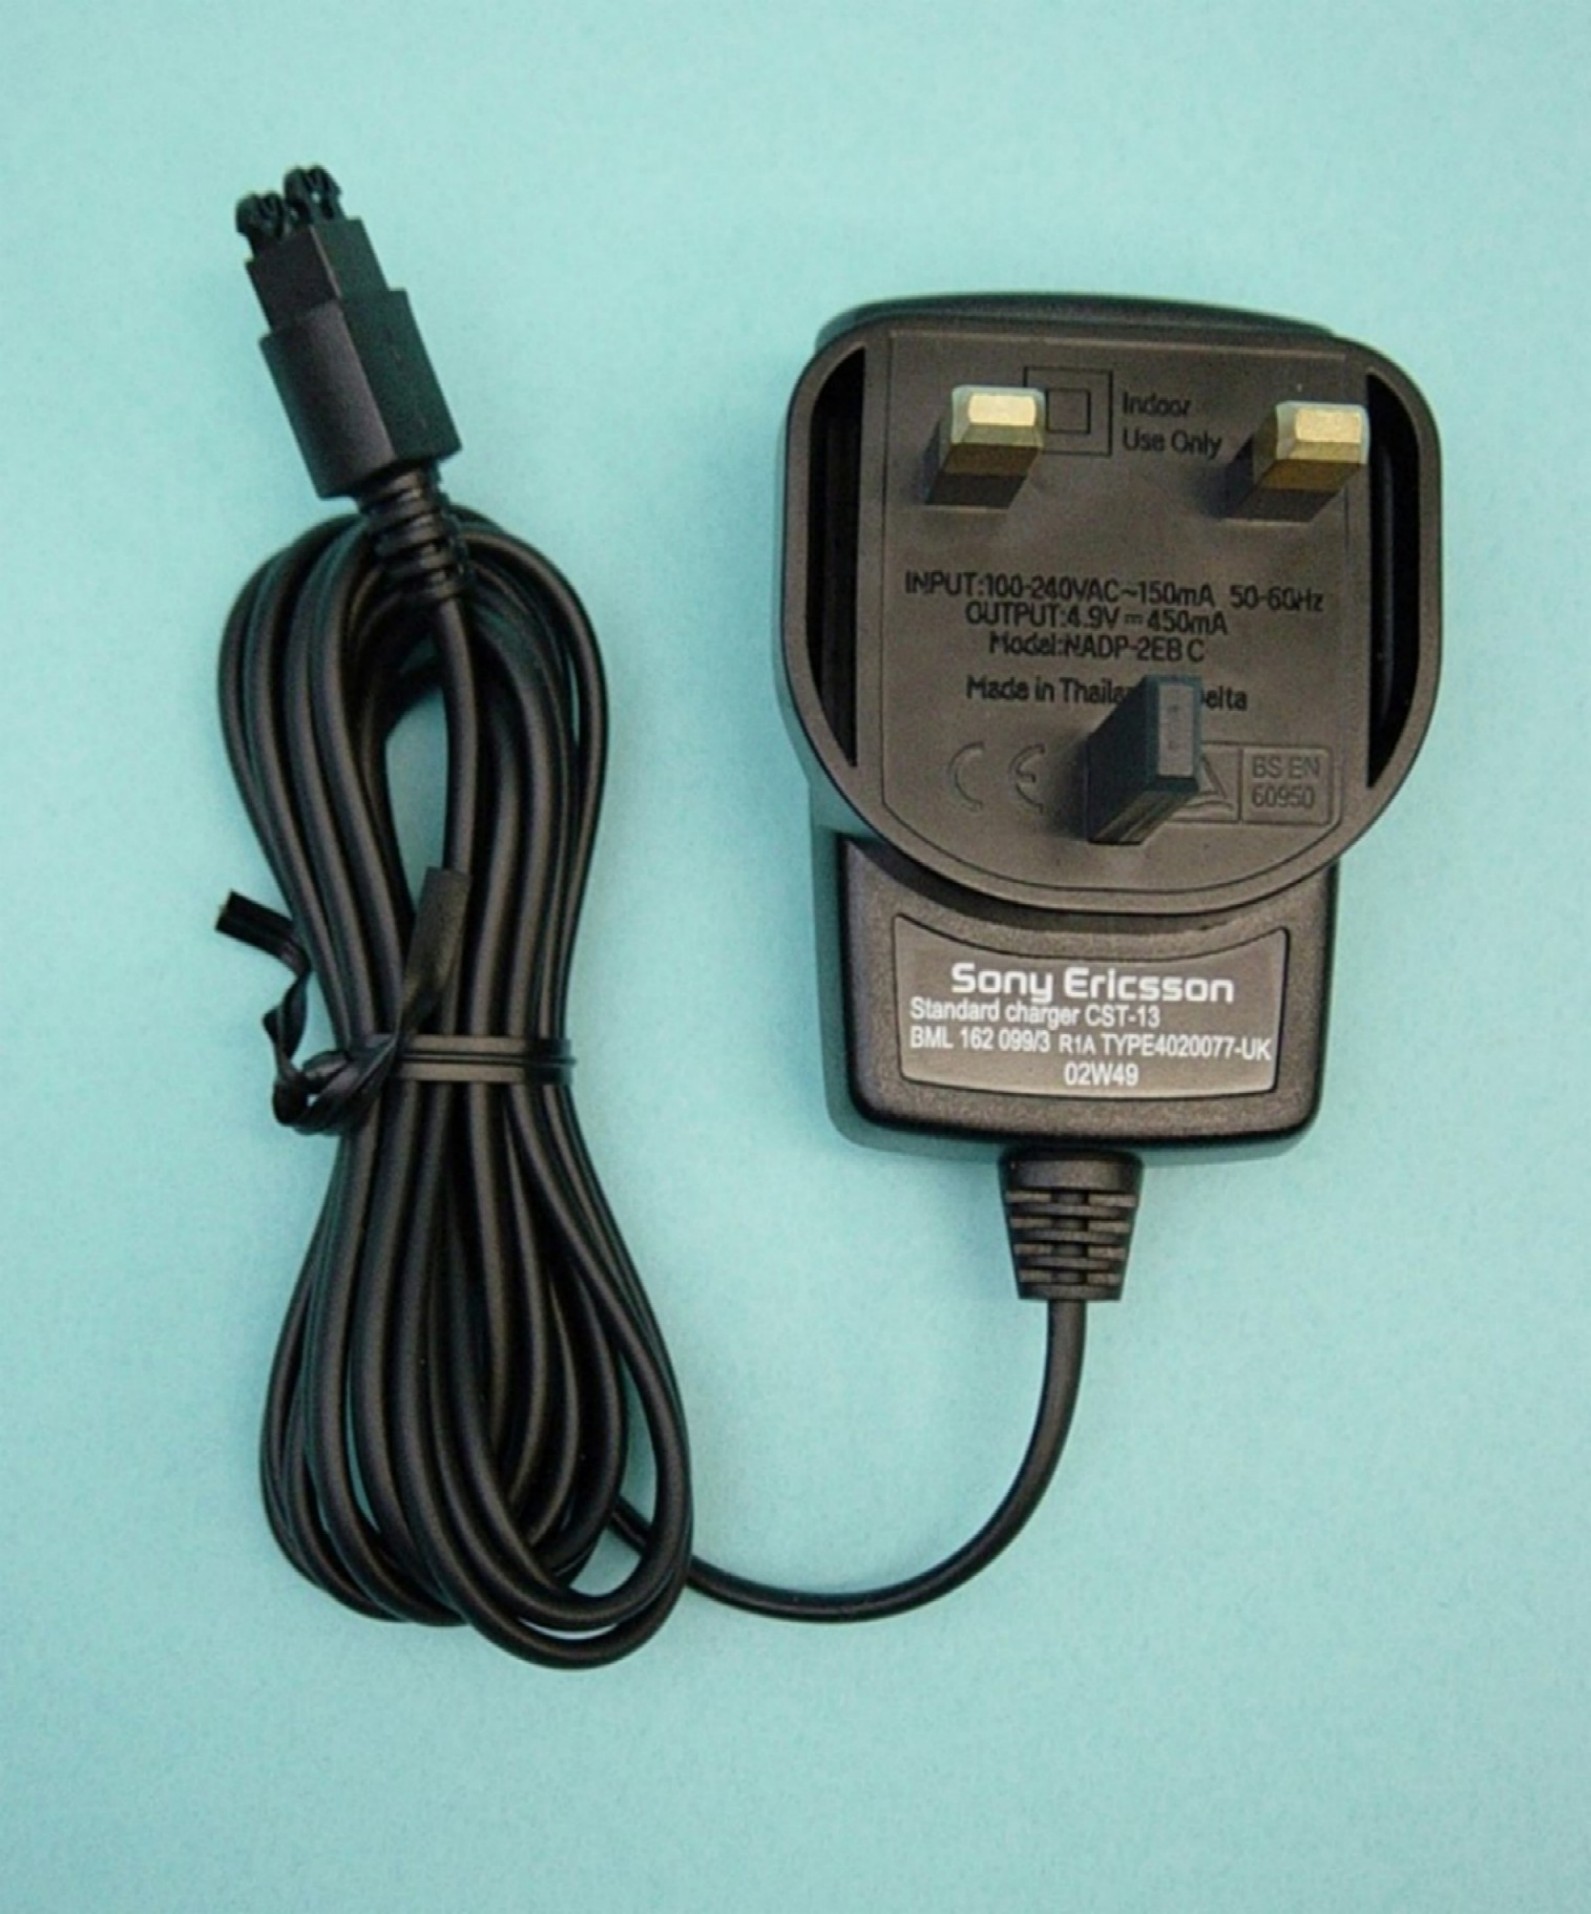 Charger (model no. CST-13) for Sony Ericsson mobile phones